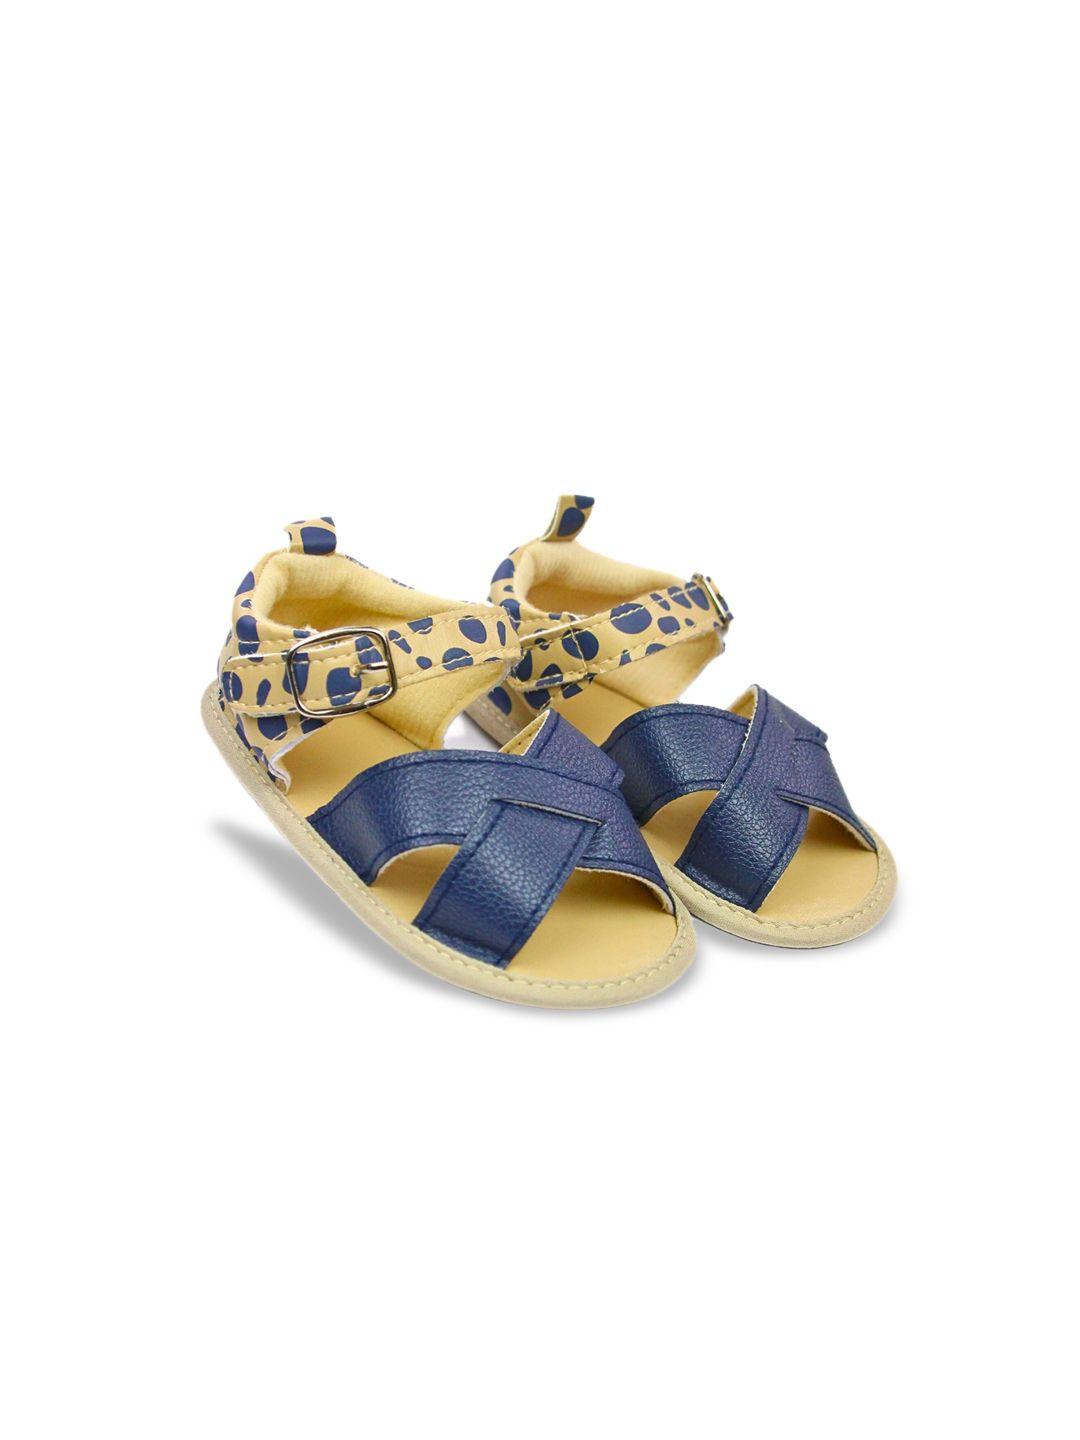 baesd infant kids printed open toe flats with buckles